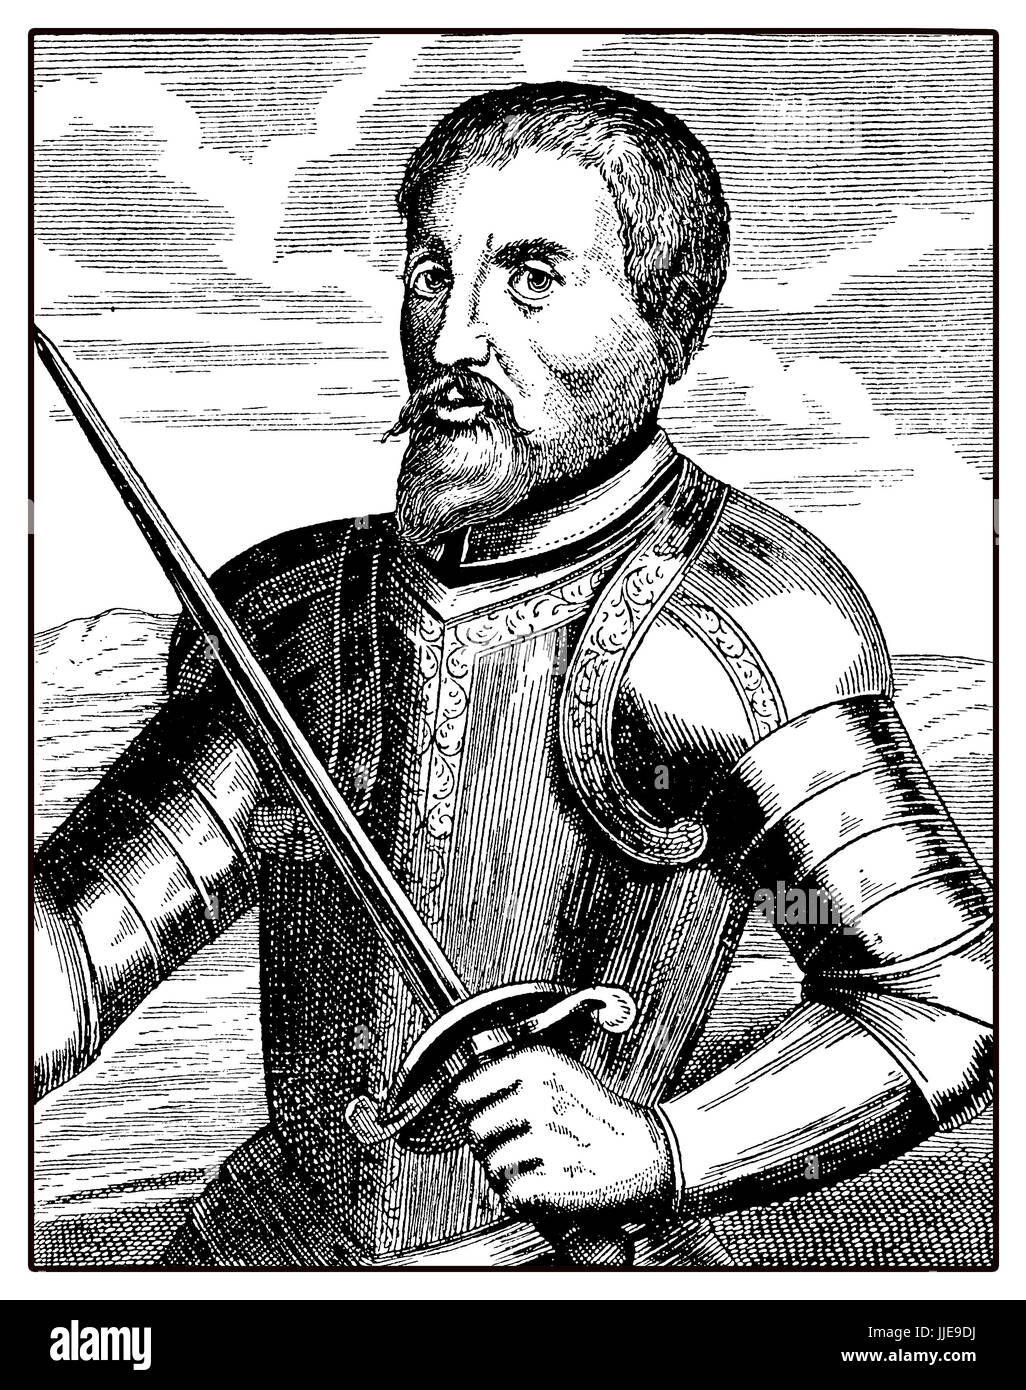 Portrait of Hernando de Soto, spanish explorer and conquistator, led the first European expedition into the territory of North America, crossing the Missisipi river in XVI century Stock Photo